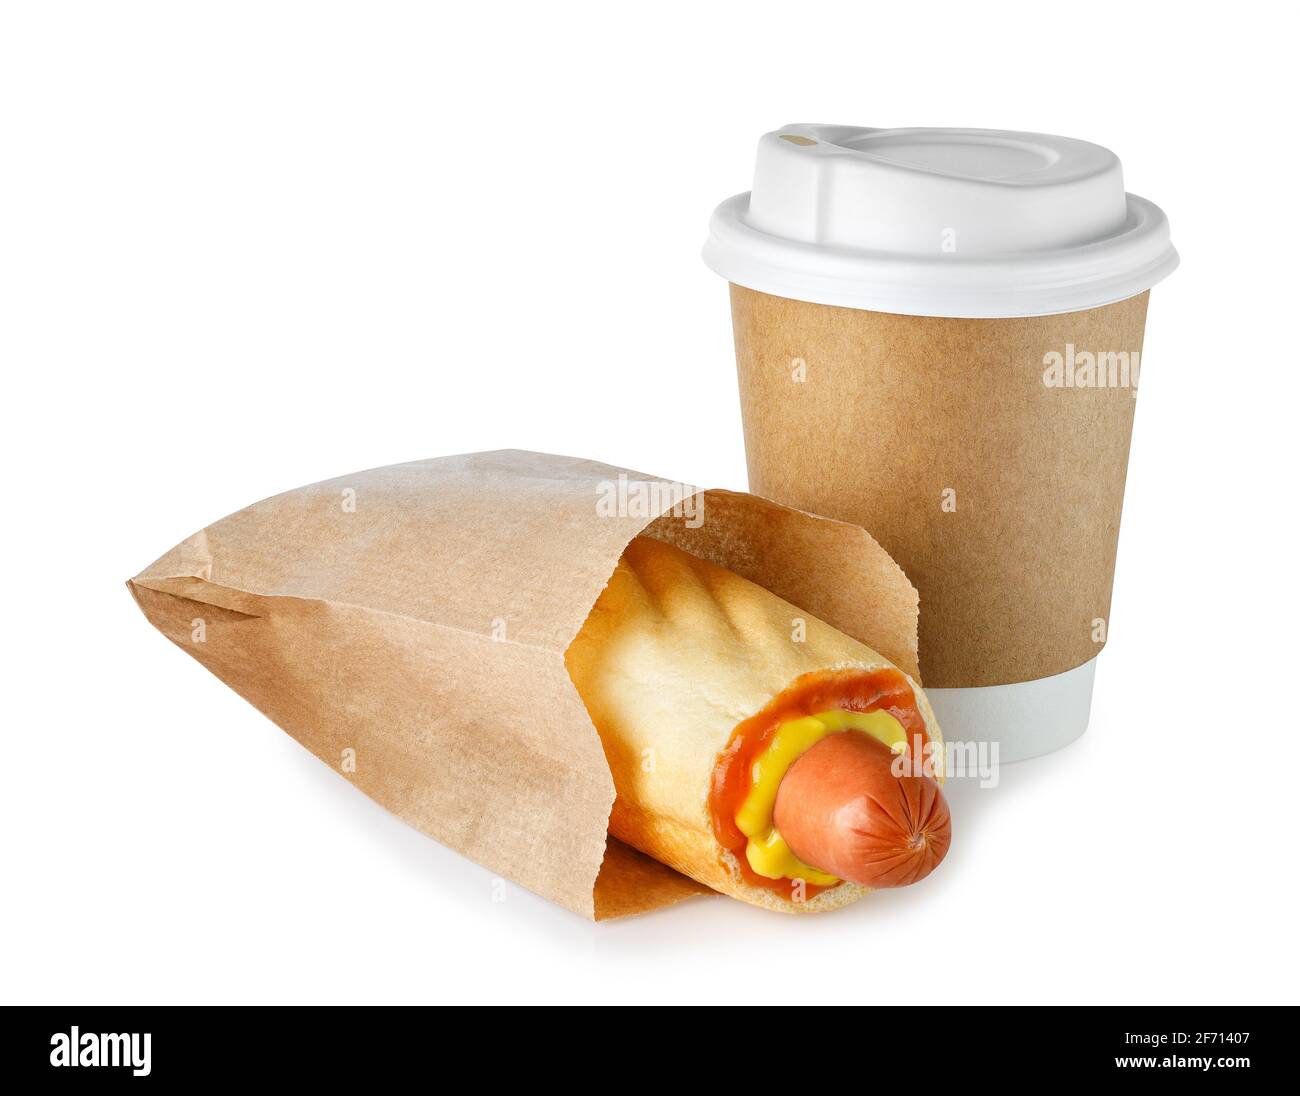 takeaway cup of coffee and hot dog Stock Photo